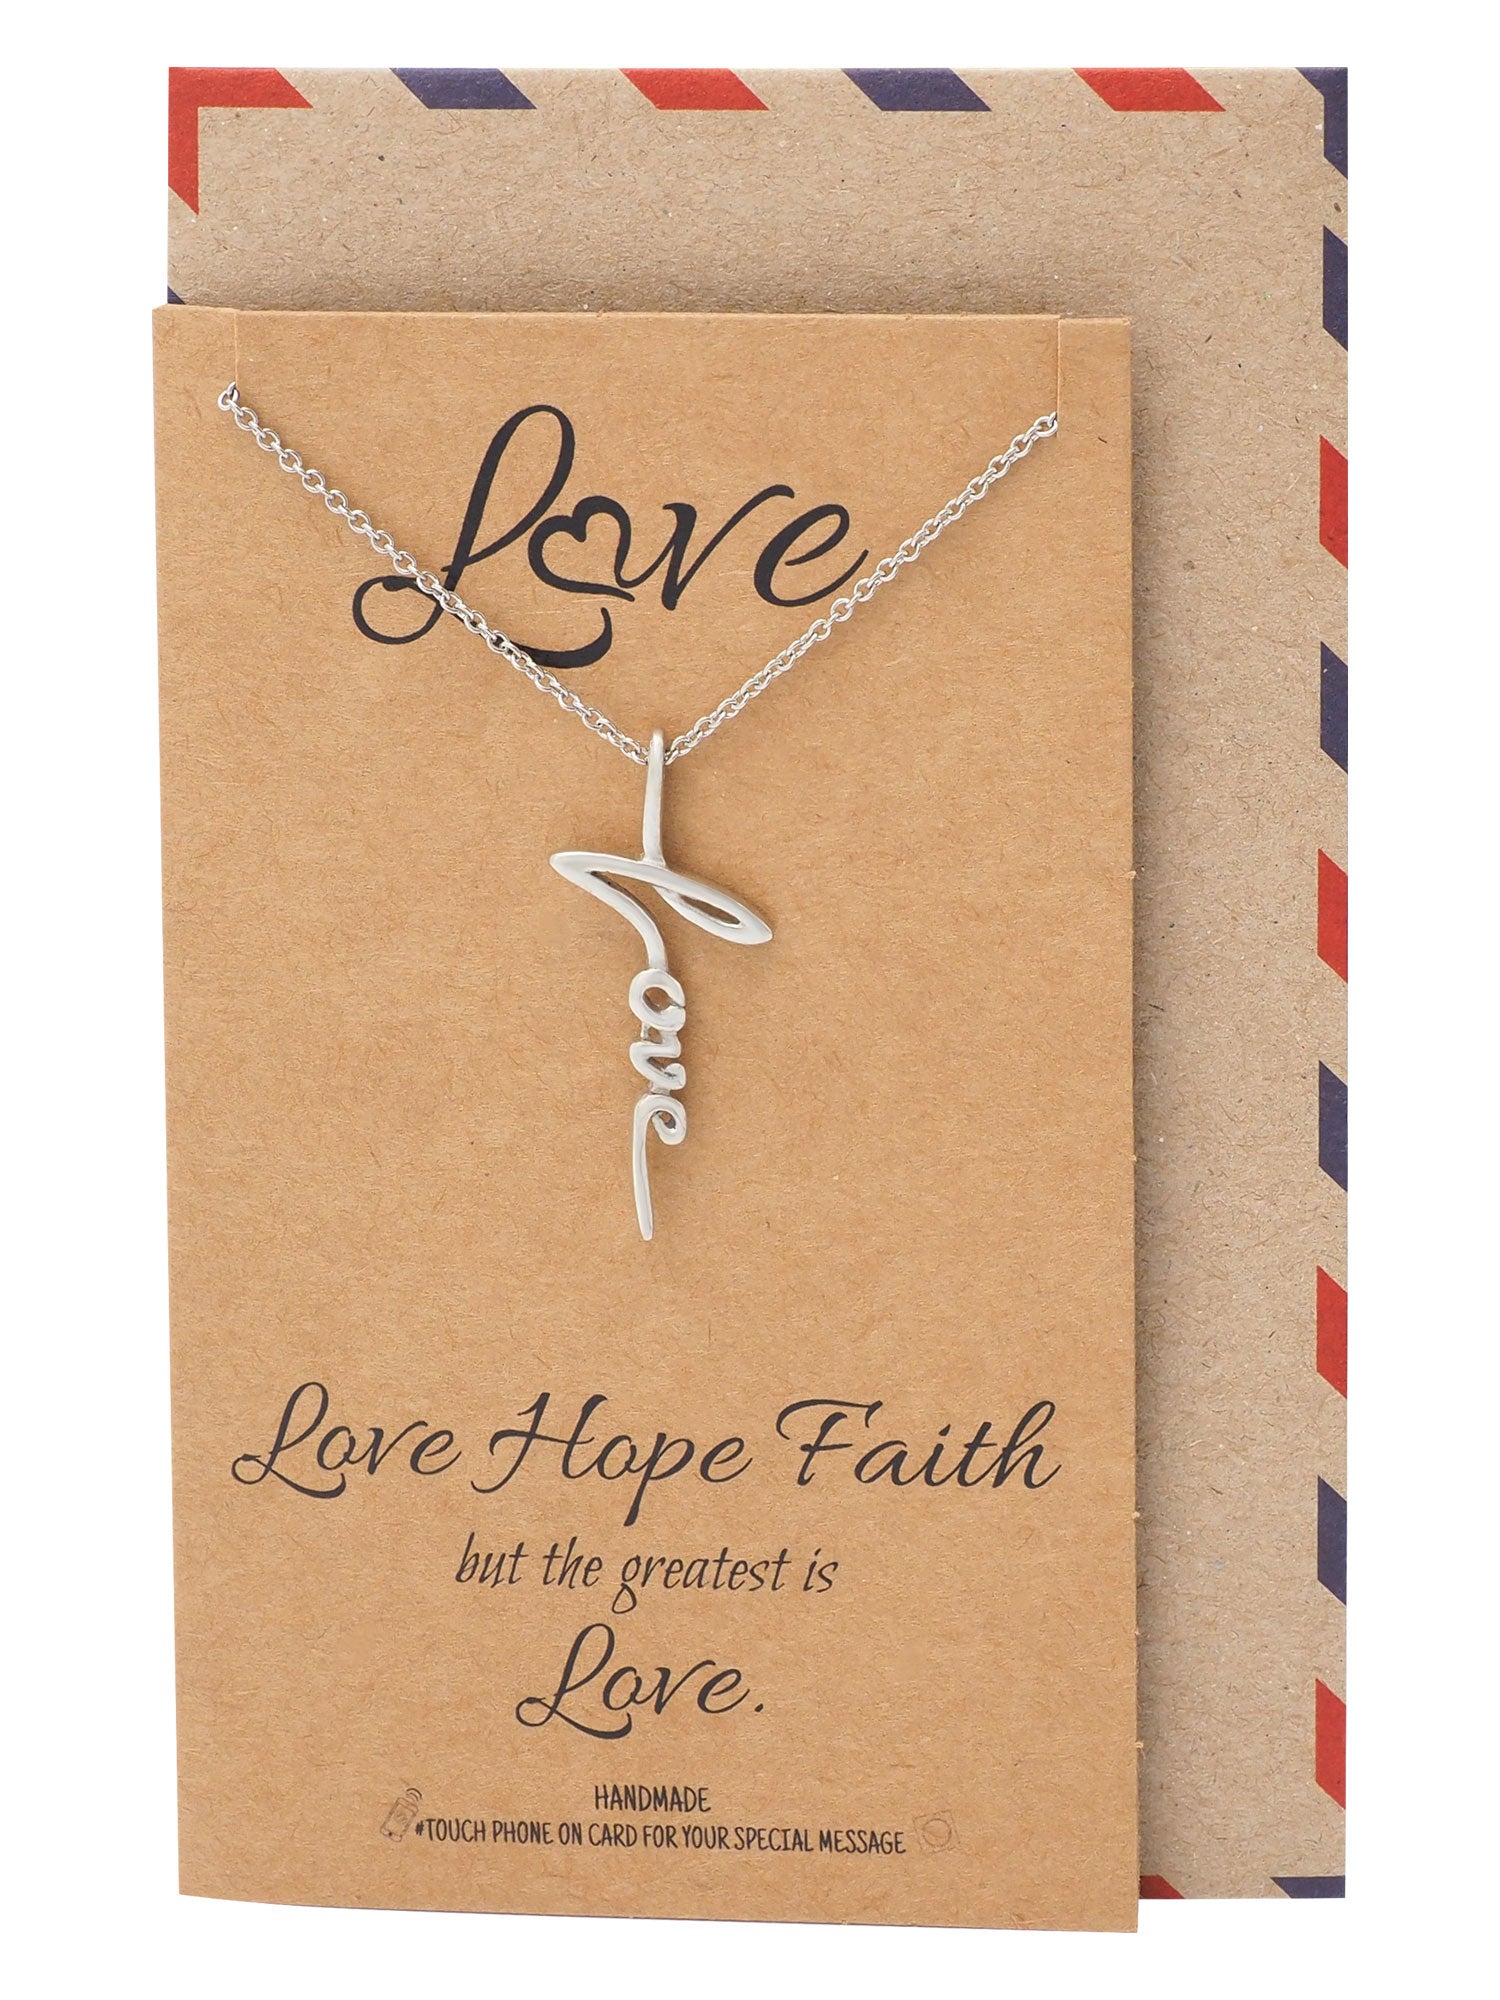 Lienel Love Pendant Necklace With Inspirational Quote